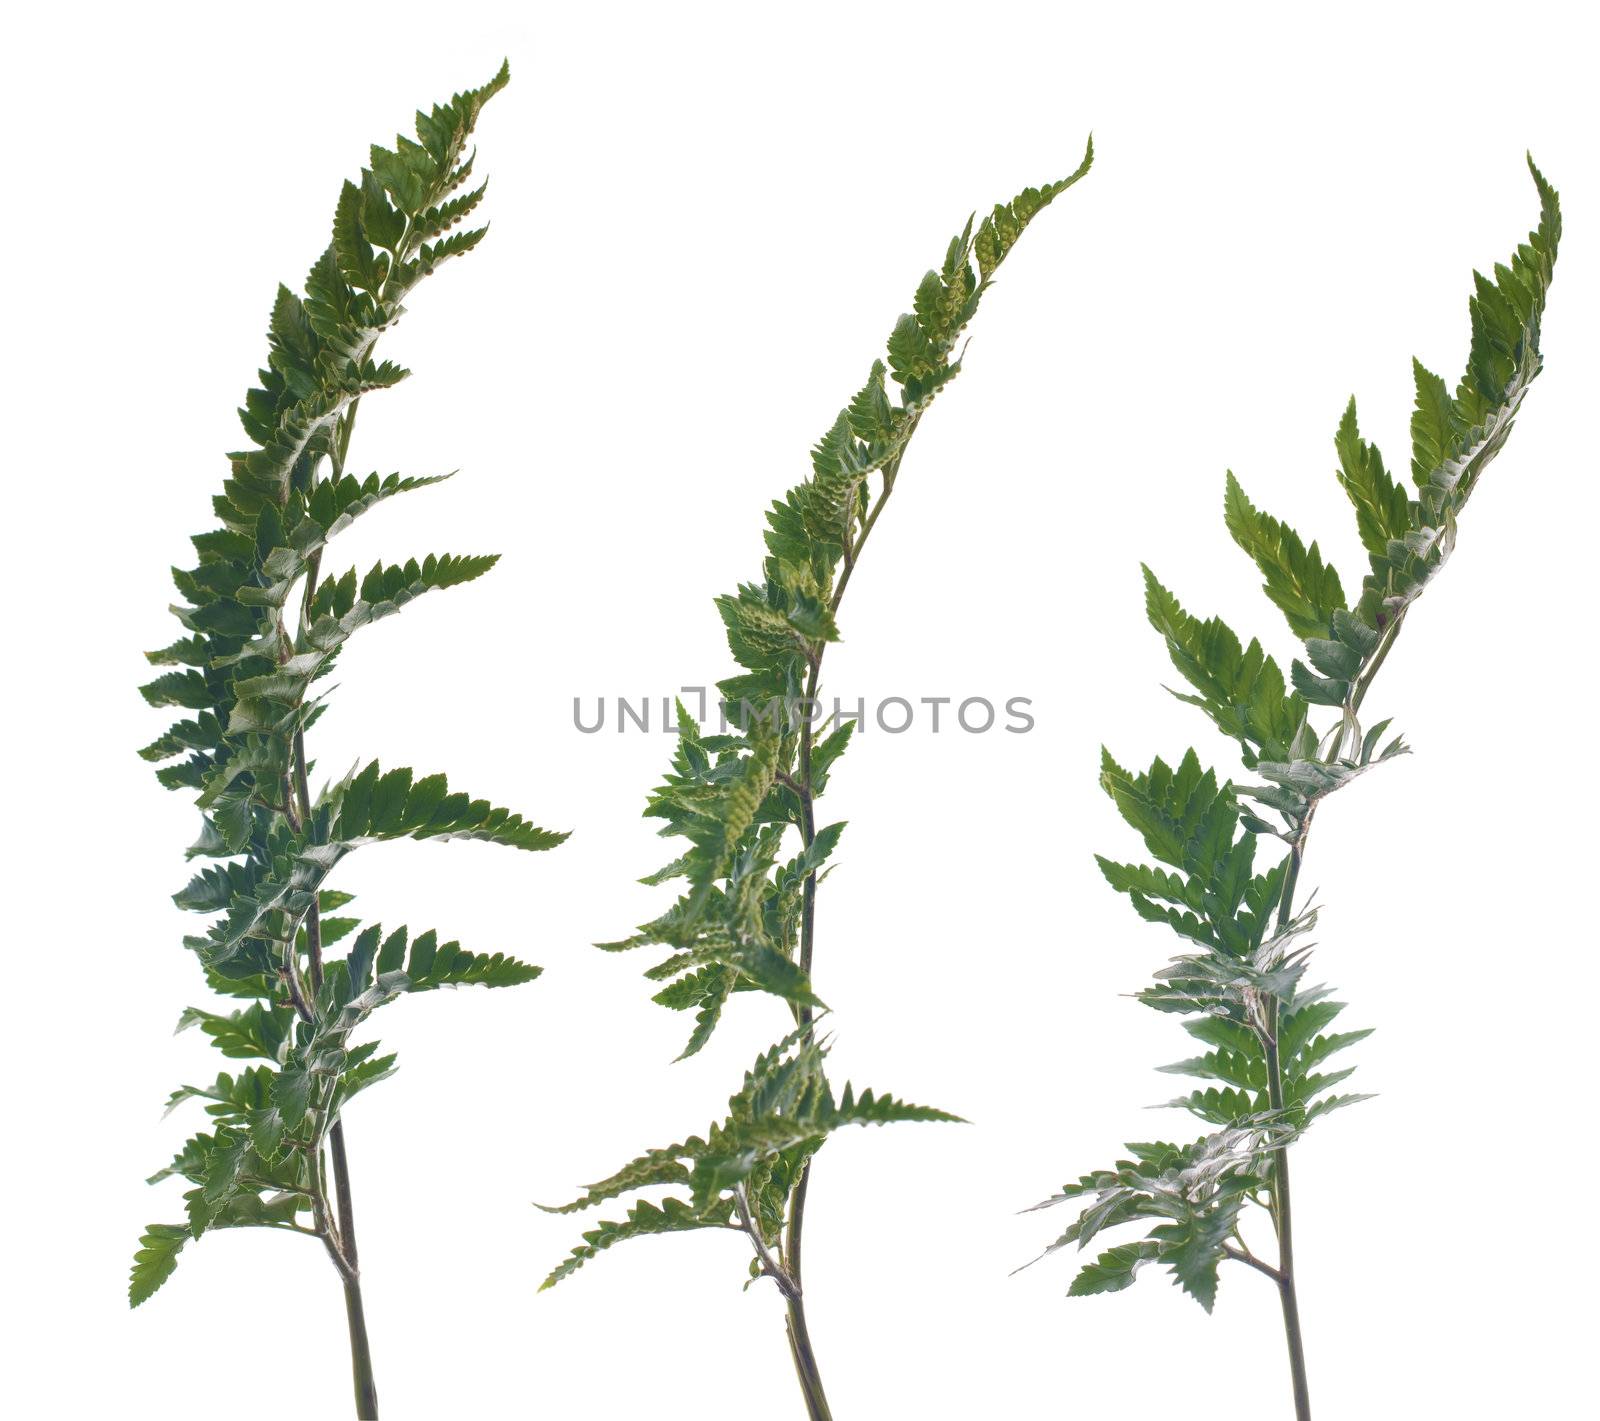 Fern leafs isolated on a white background.